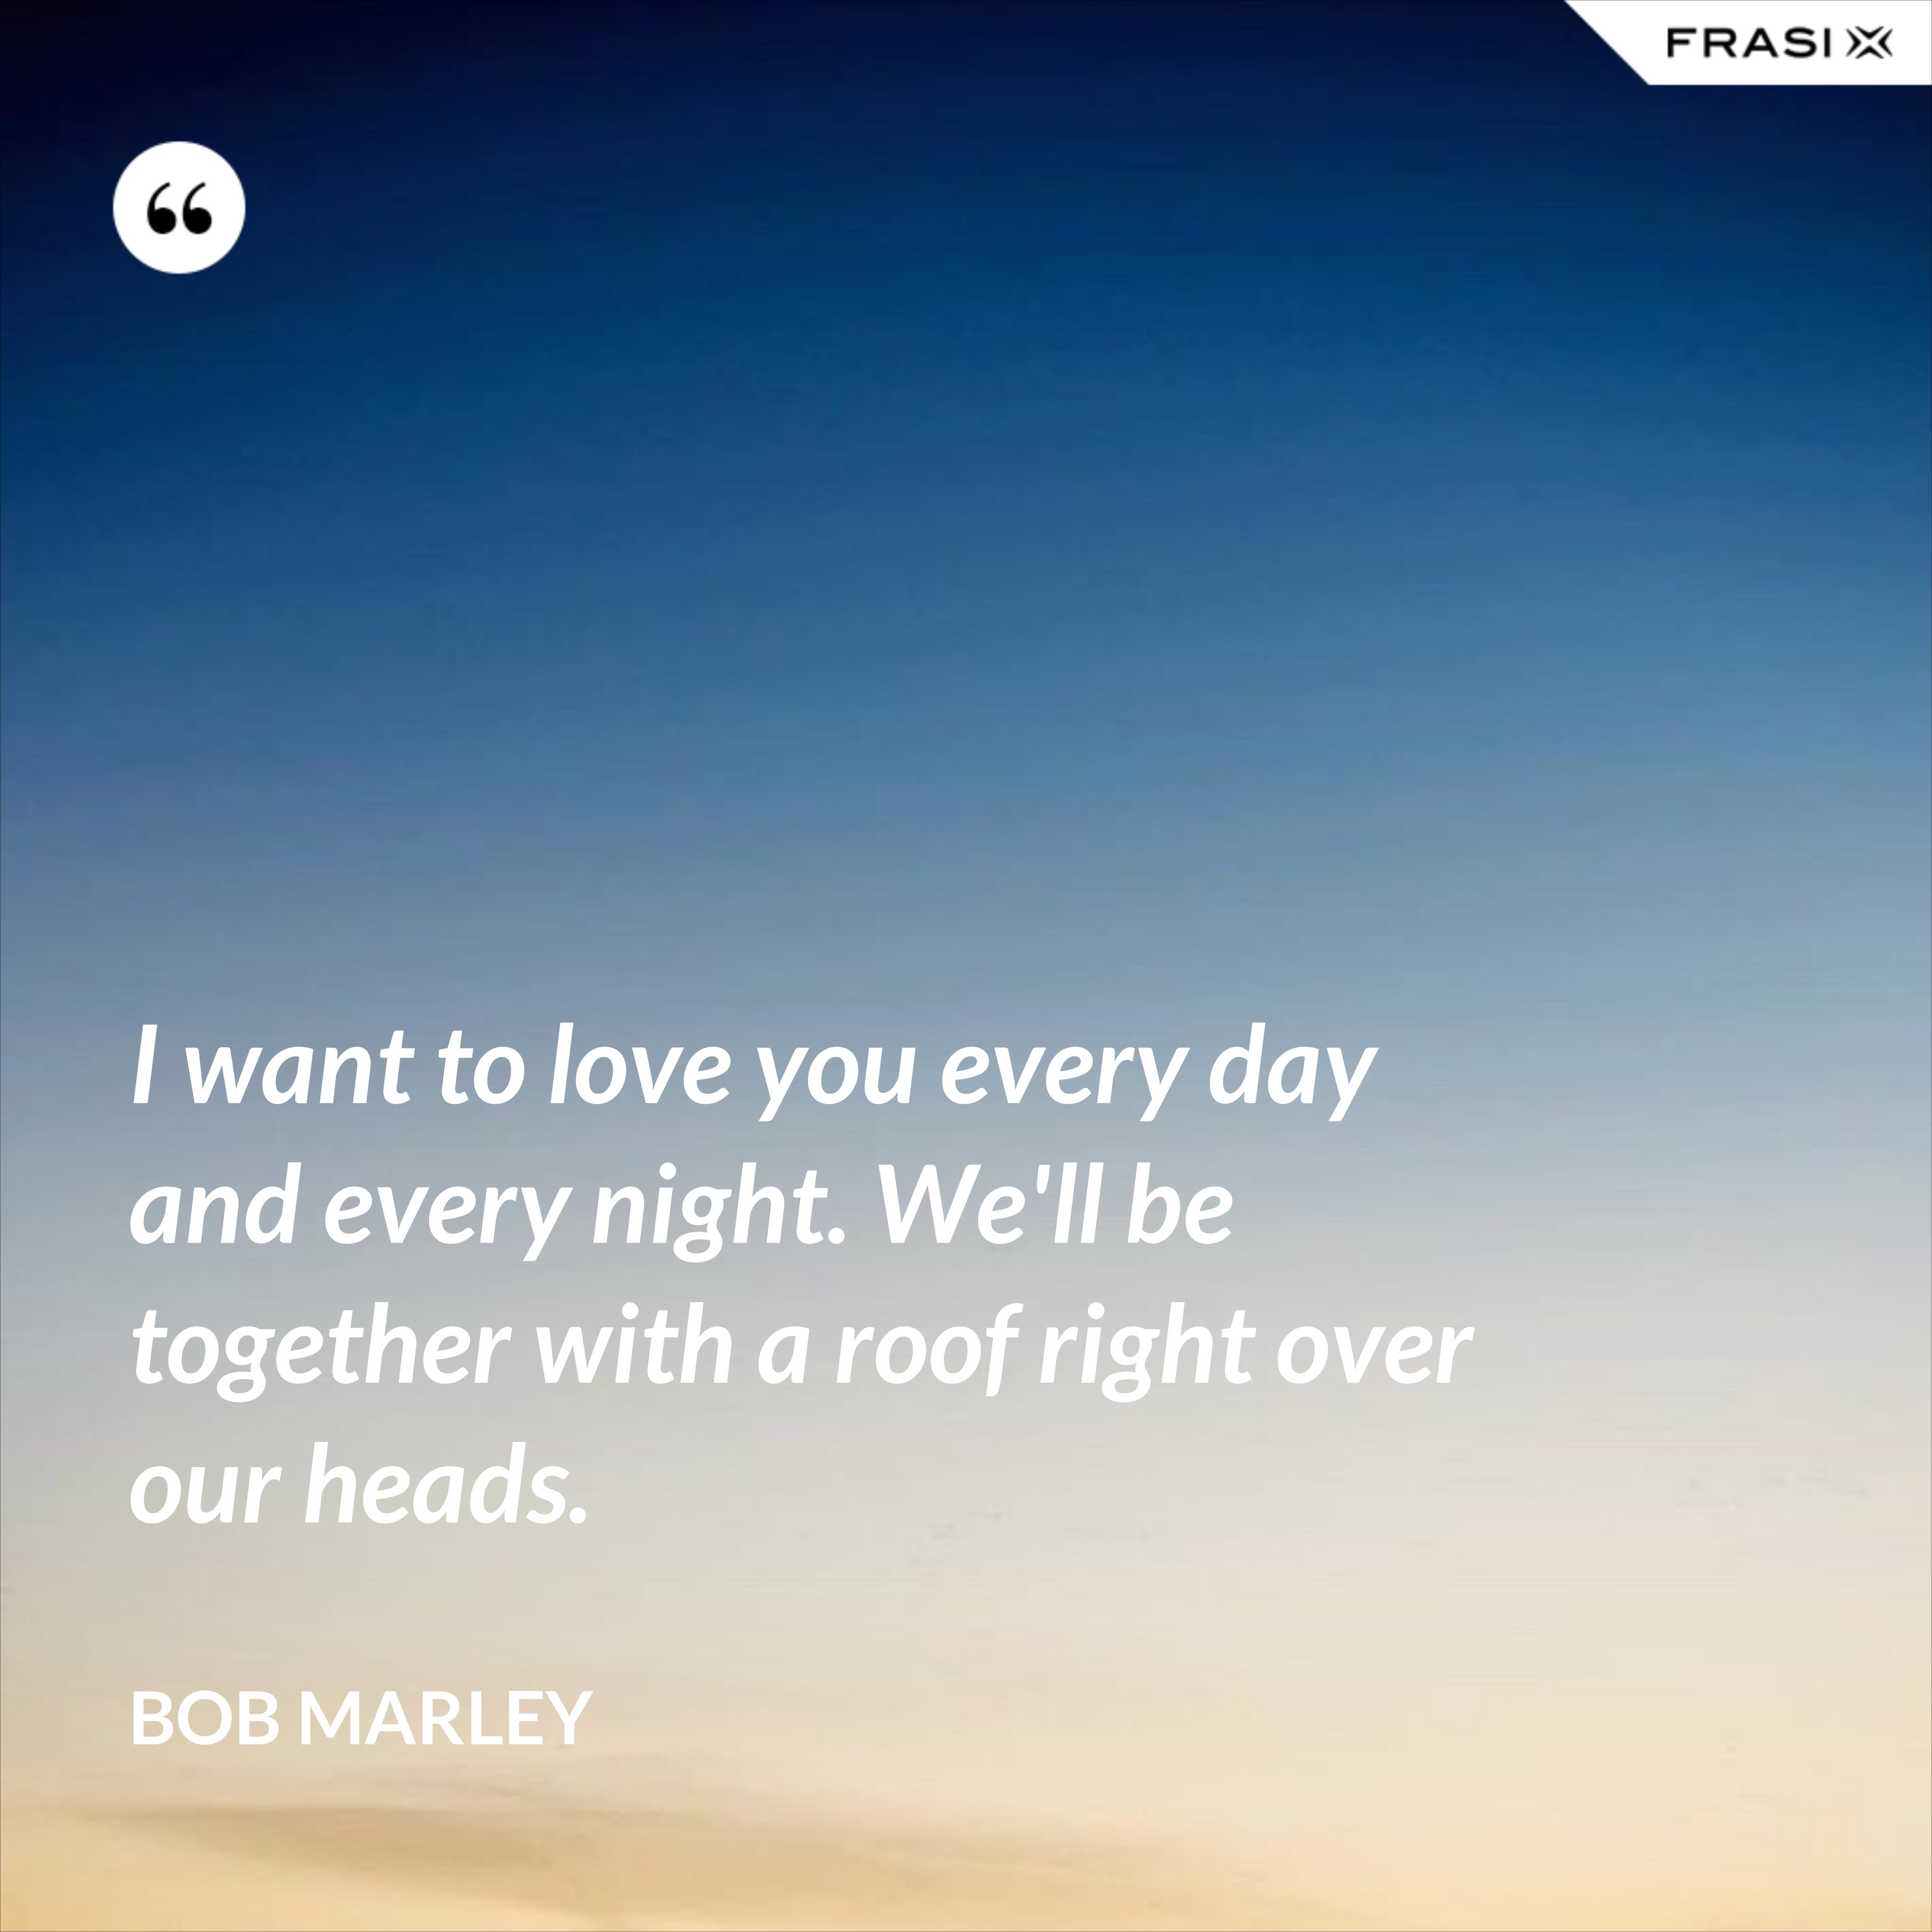 I want to love you every day and every night. We'll be together with a roof right over our heads. - Bob Marley